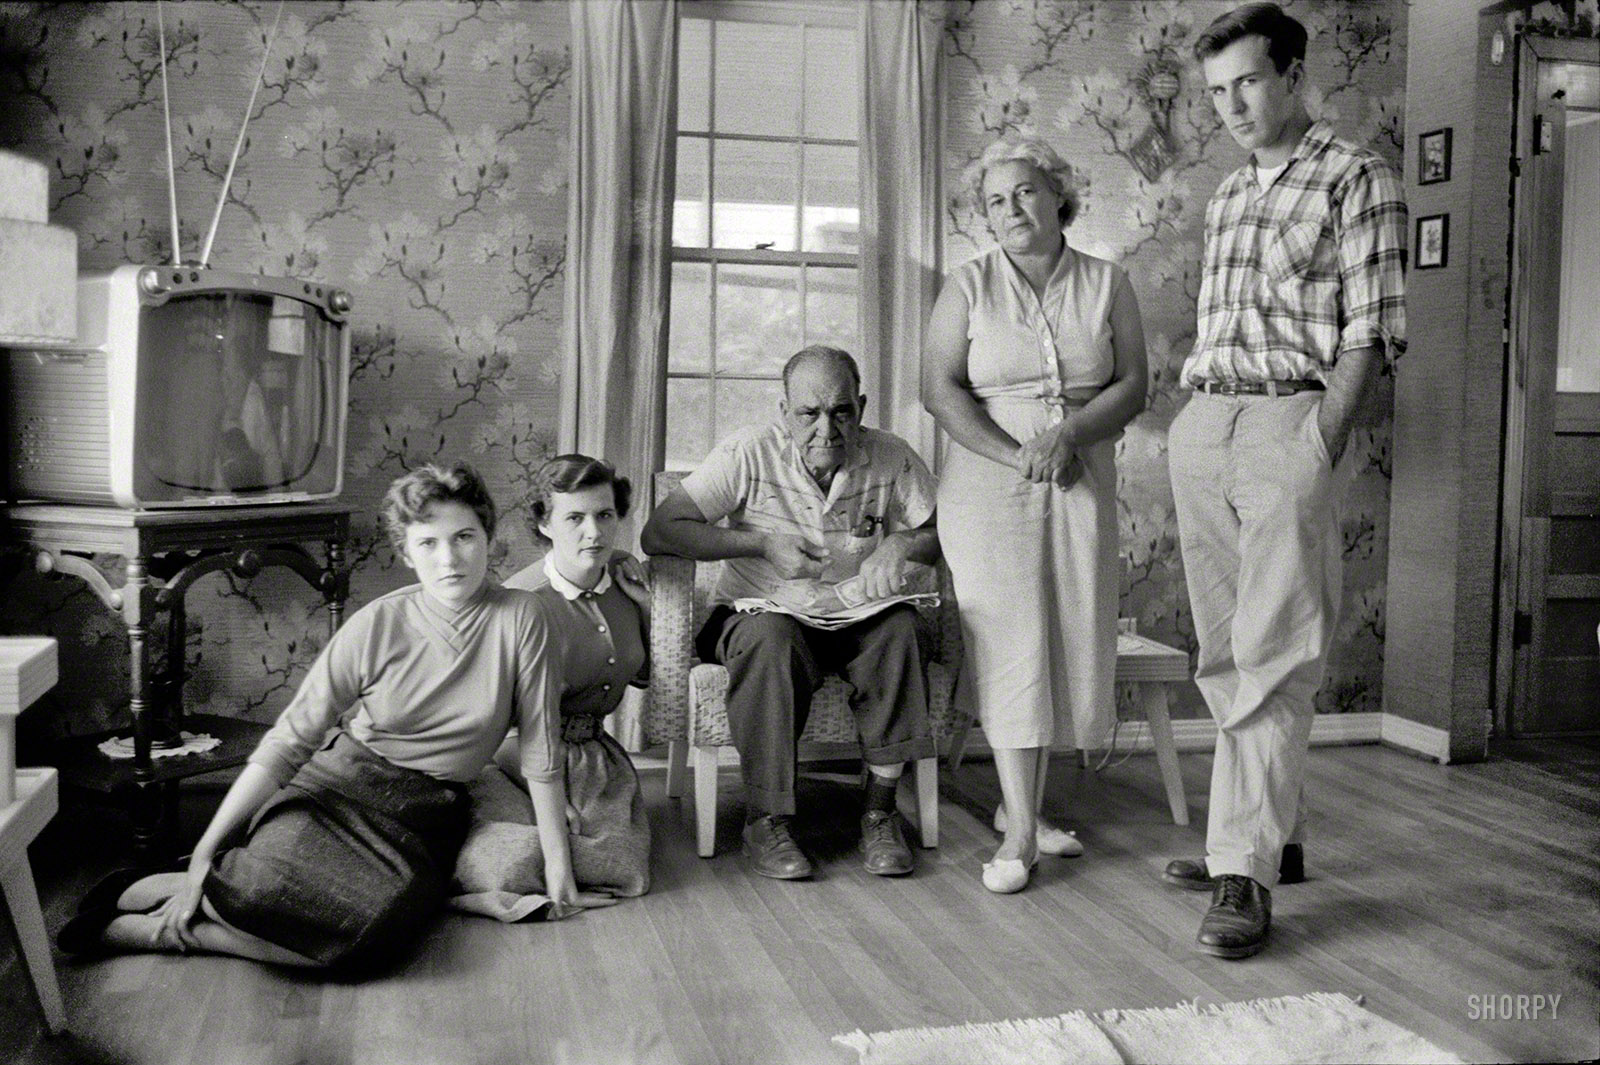 October 1957. "The Lemon family of Little Rock, Arkansas -- father Fred, mother Edith, daughters Virginia and Rosemary, and son Gary -- at home; in front of state capitol building; on streets of Little Rock." From photos by John Vachon for the Look magazine assignment "Members of the Mob." View full size.